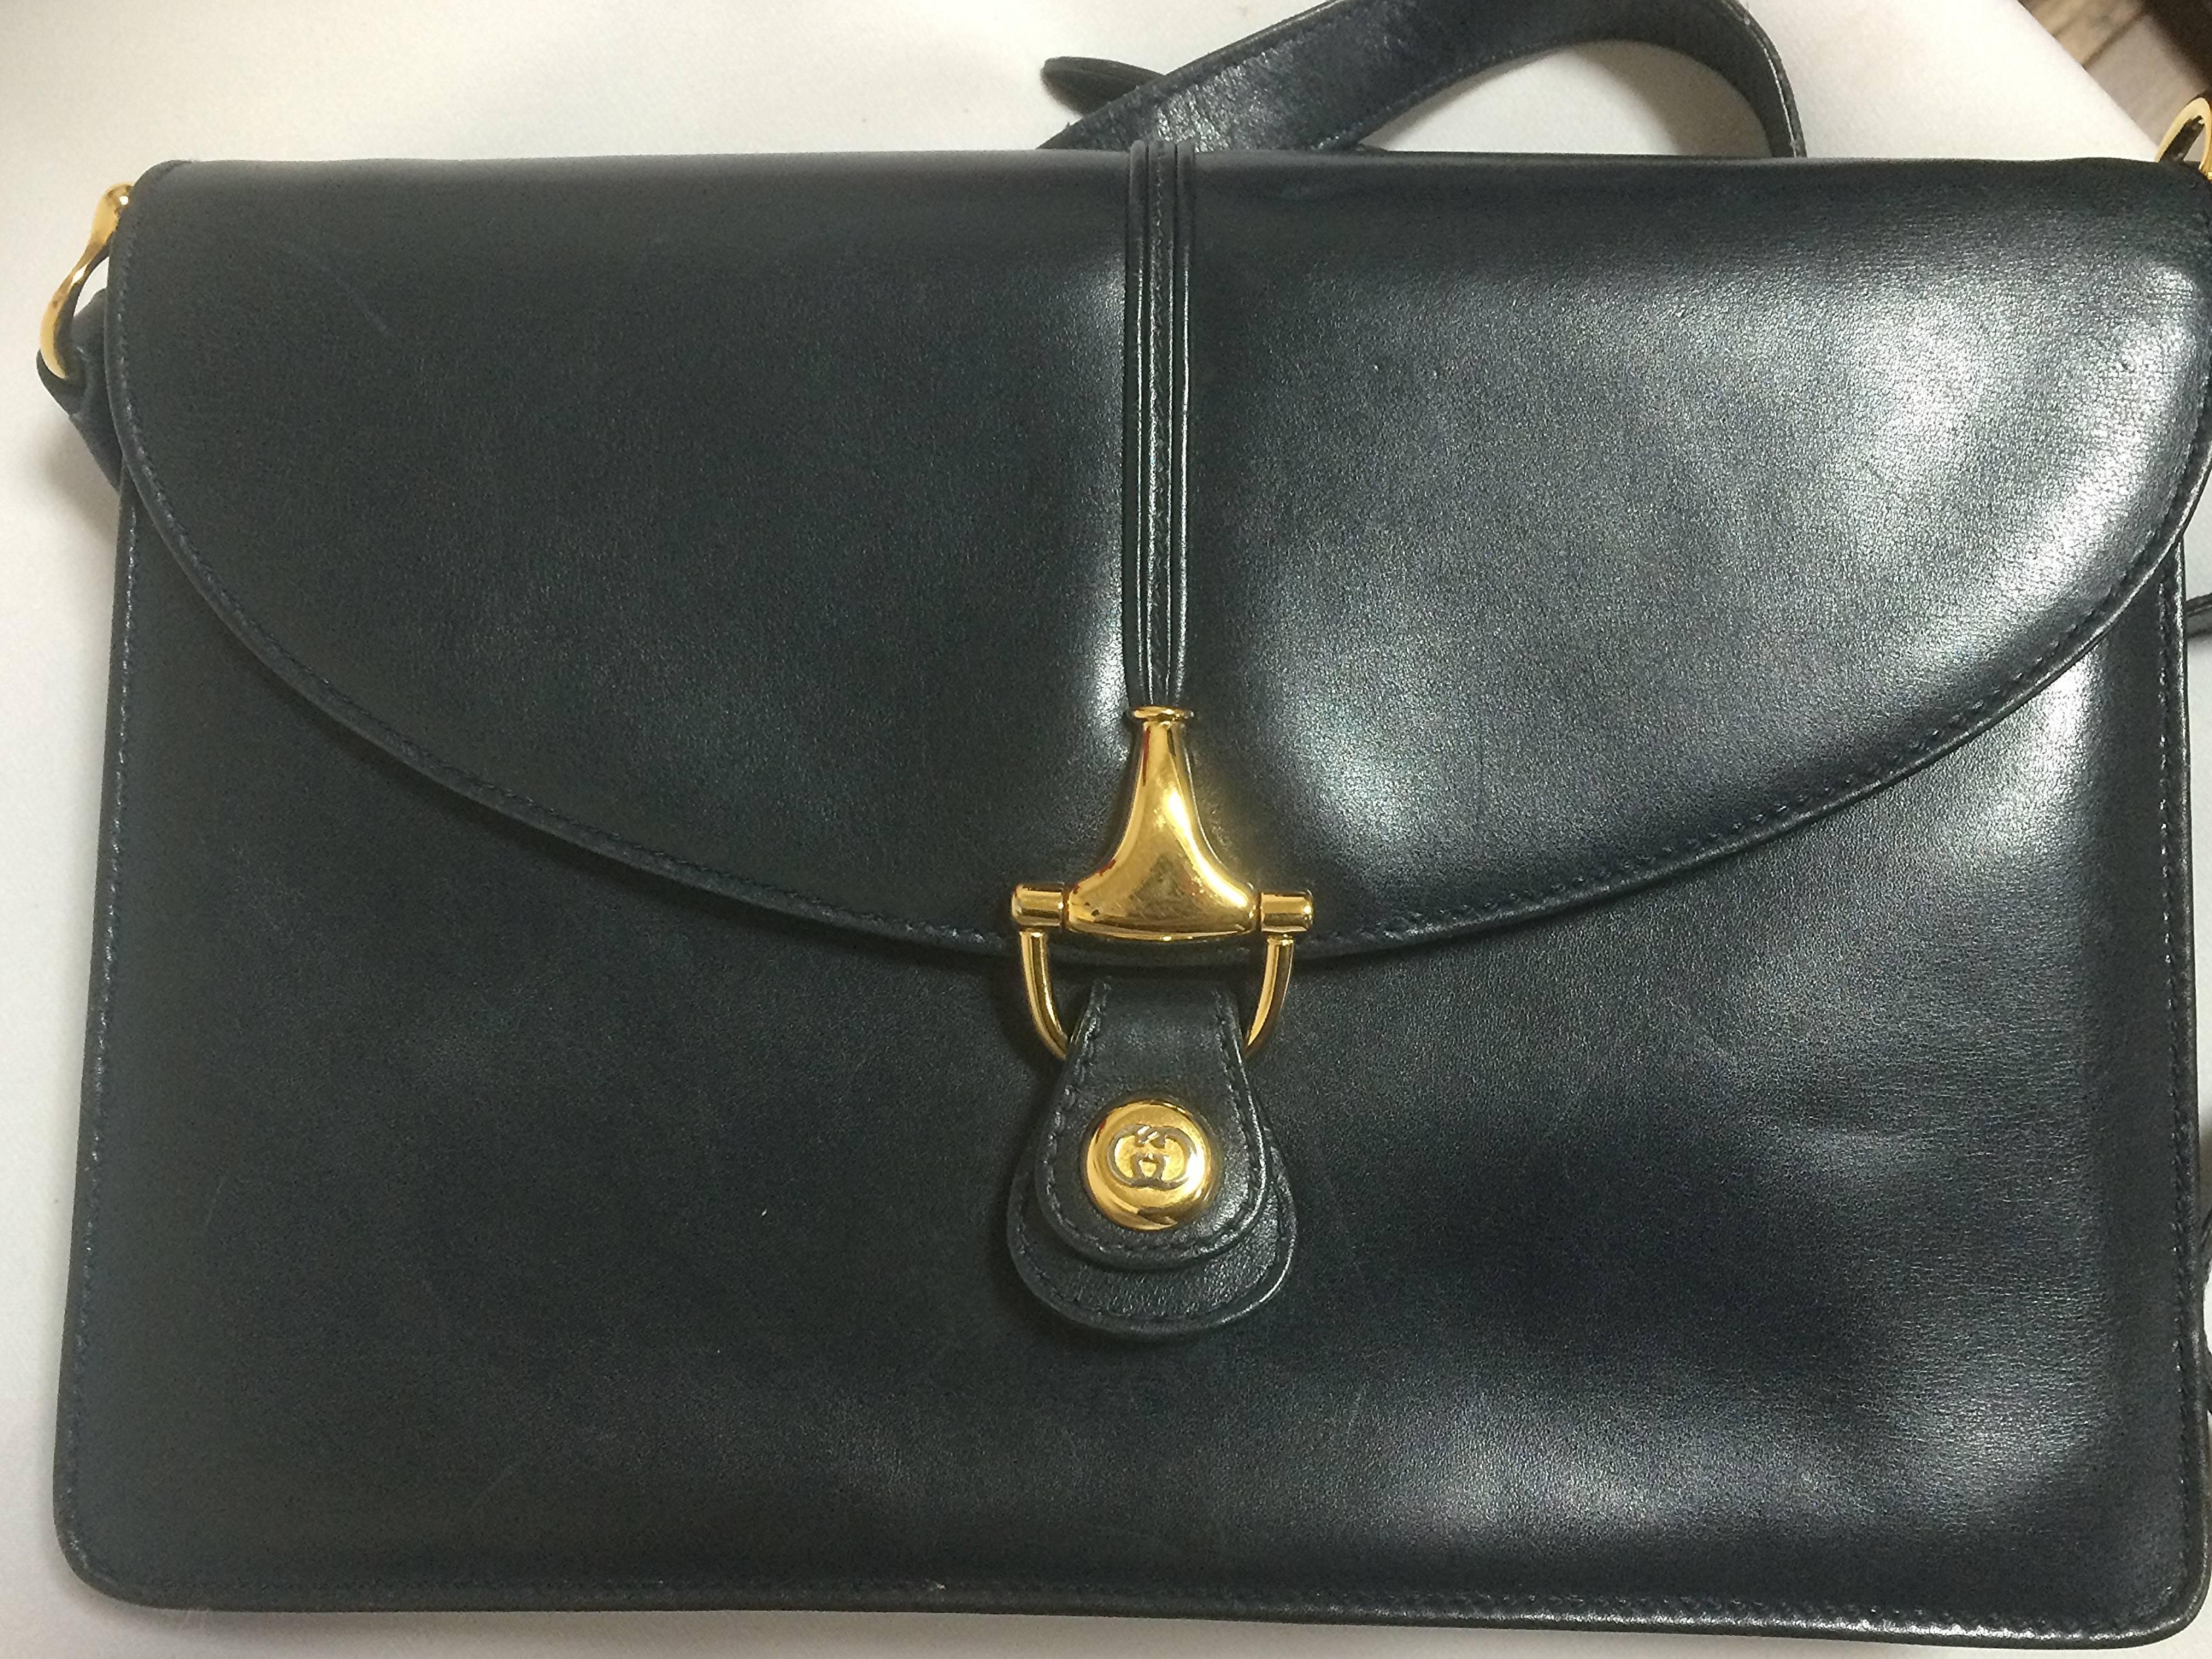 1980’s Vintage Gucci navy leather classic shoulder bag with golden horsebit logo motif closure.Elegant daily use vintage Gucci bag

Introducing a masterpiece, navy leather shoulder bag from Gucci back in the 80's.
Very sophisticated bag that